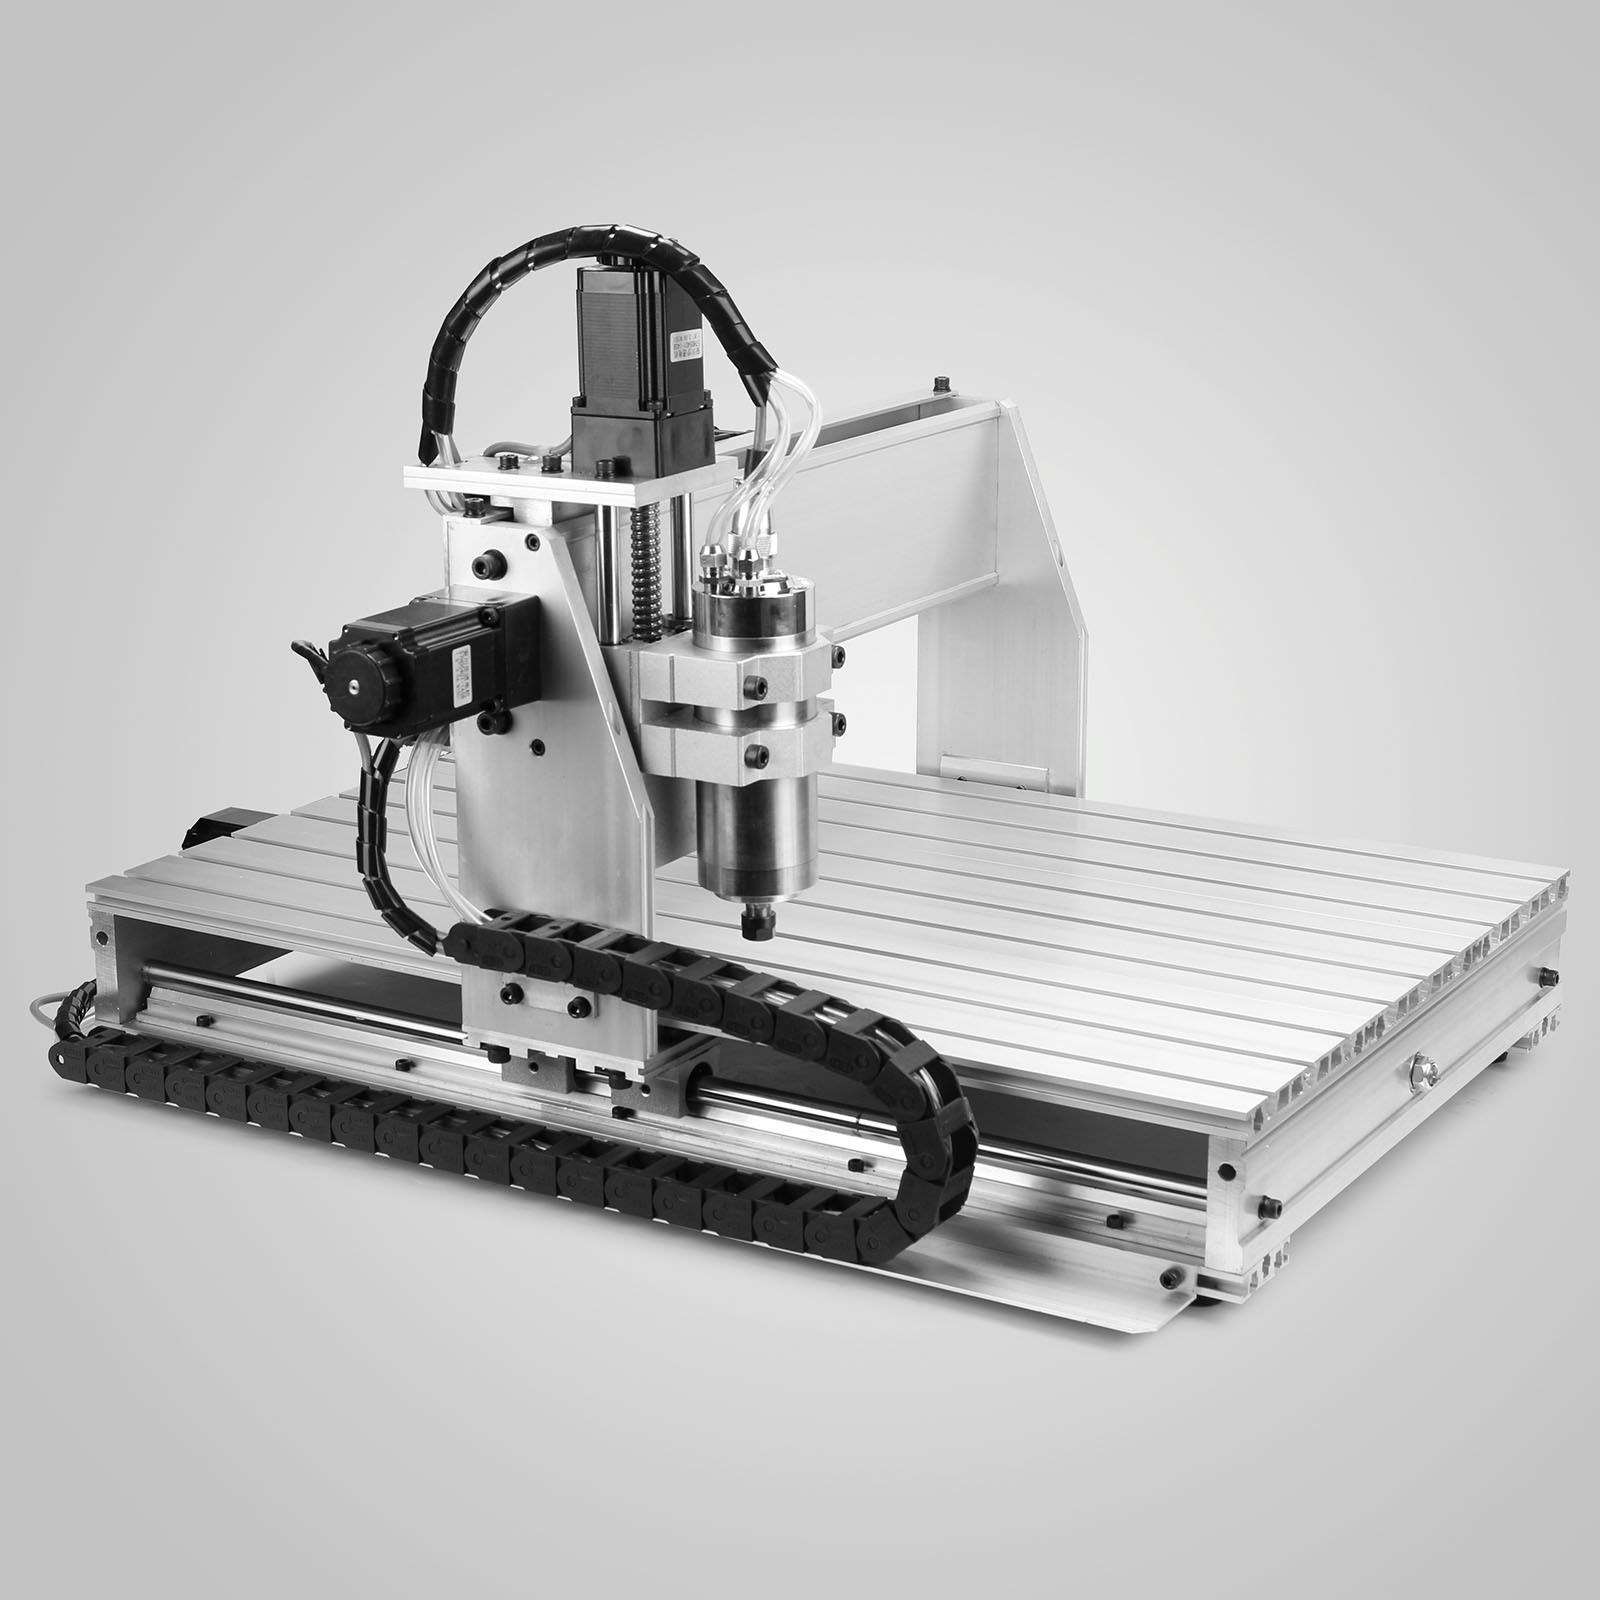 3 Axis Motors Cnc 6040z Router 1 5kw Engraver Engraving Drilling Milling Machine Ebay